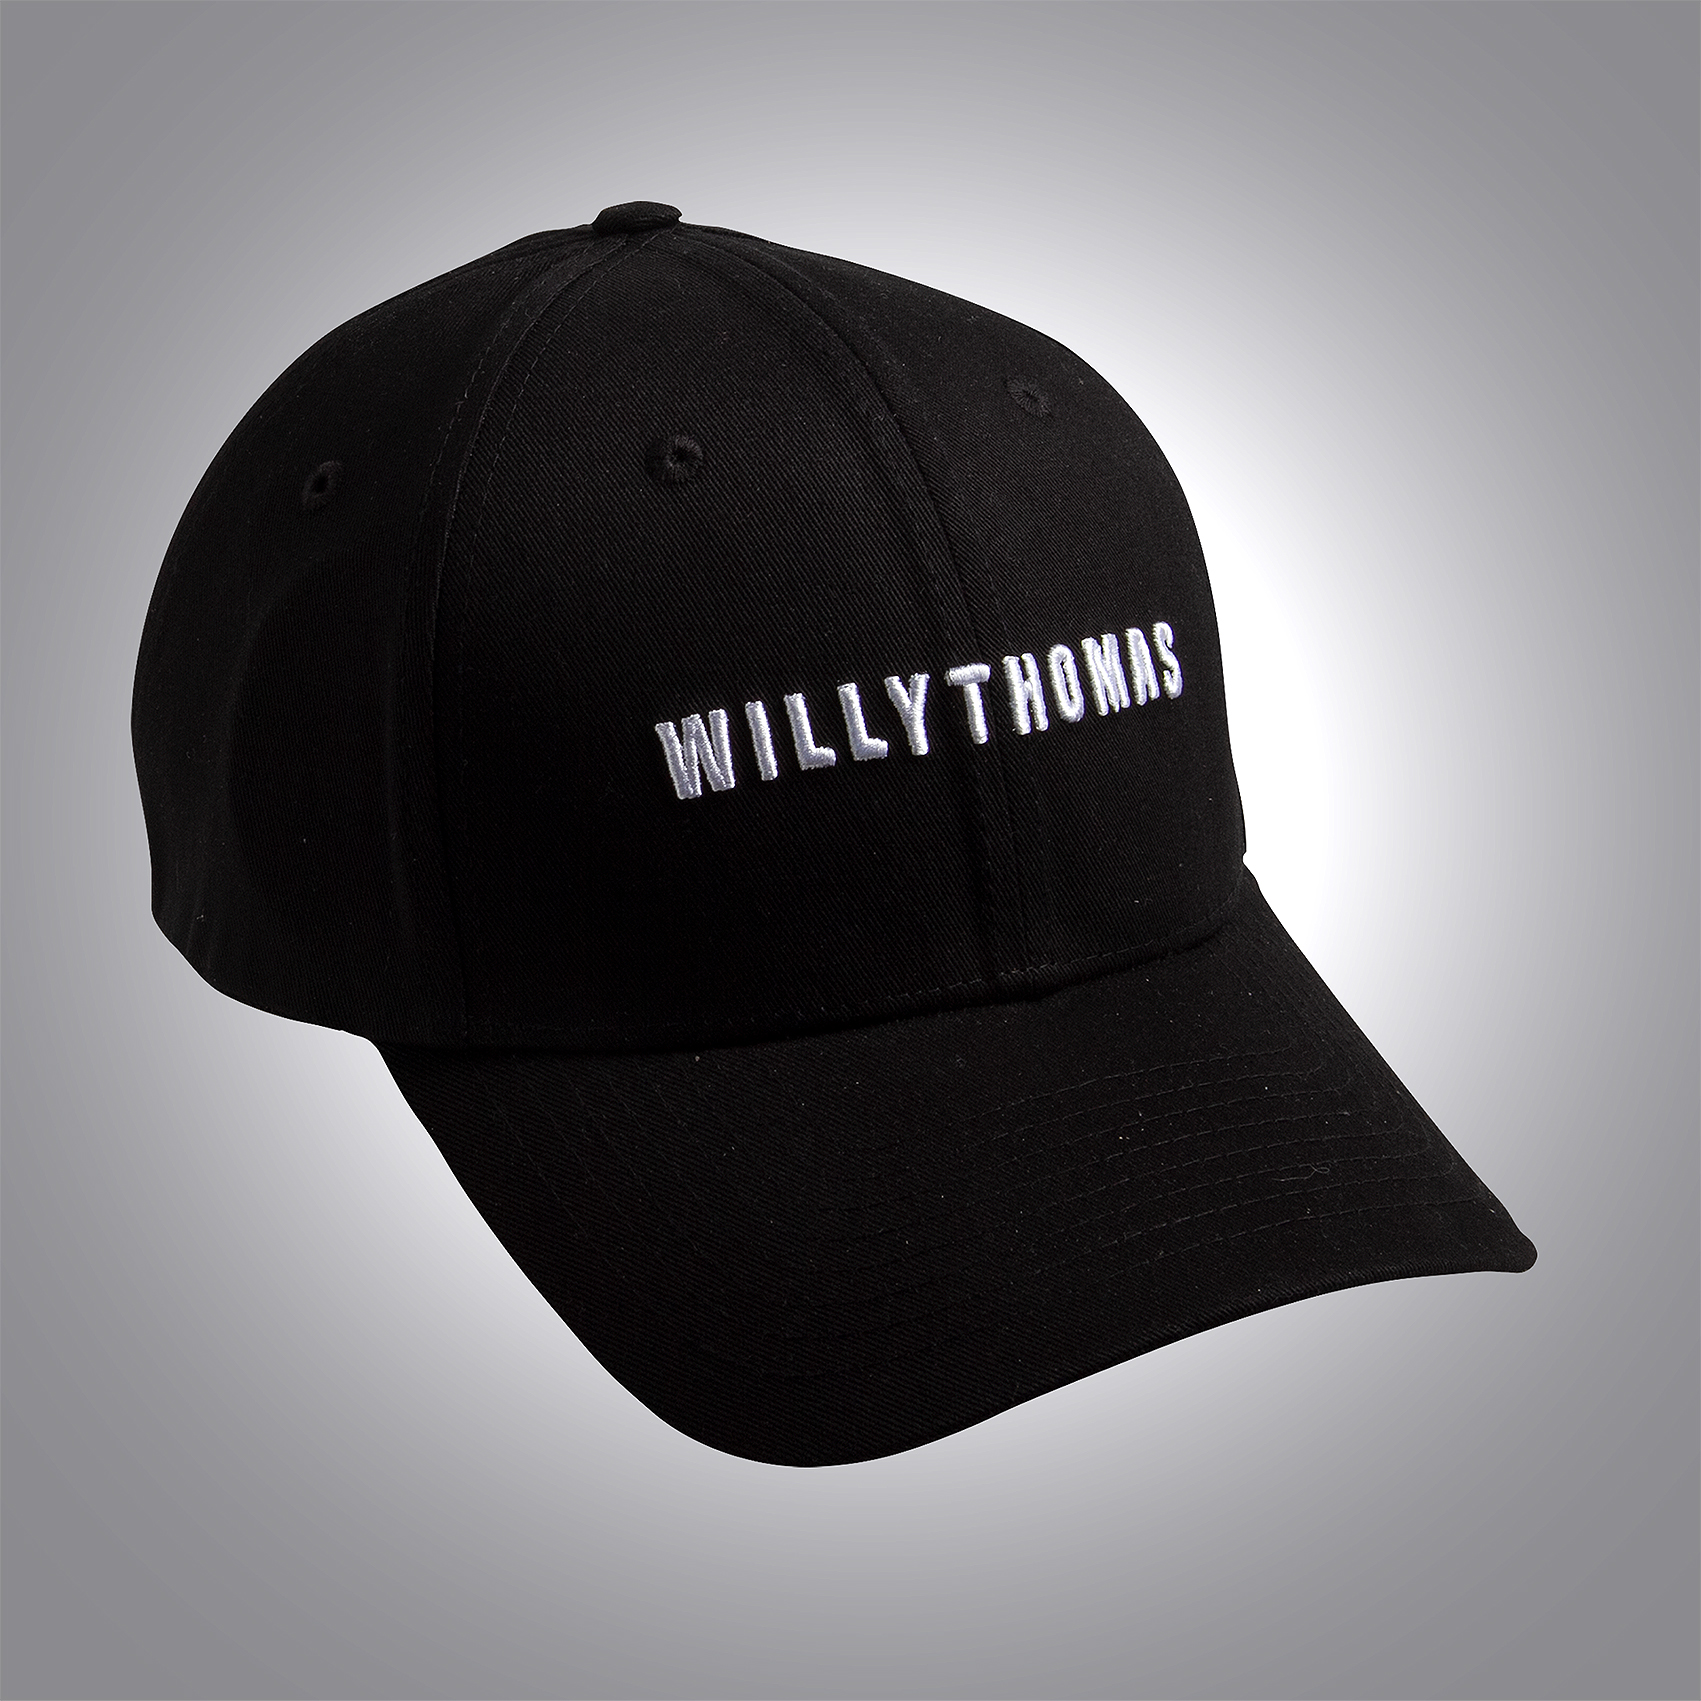 CASQUETTE WILLY THOMAS - Site Officiel Willy Thomas